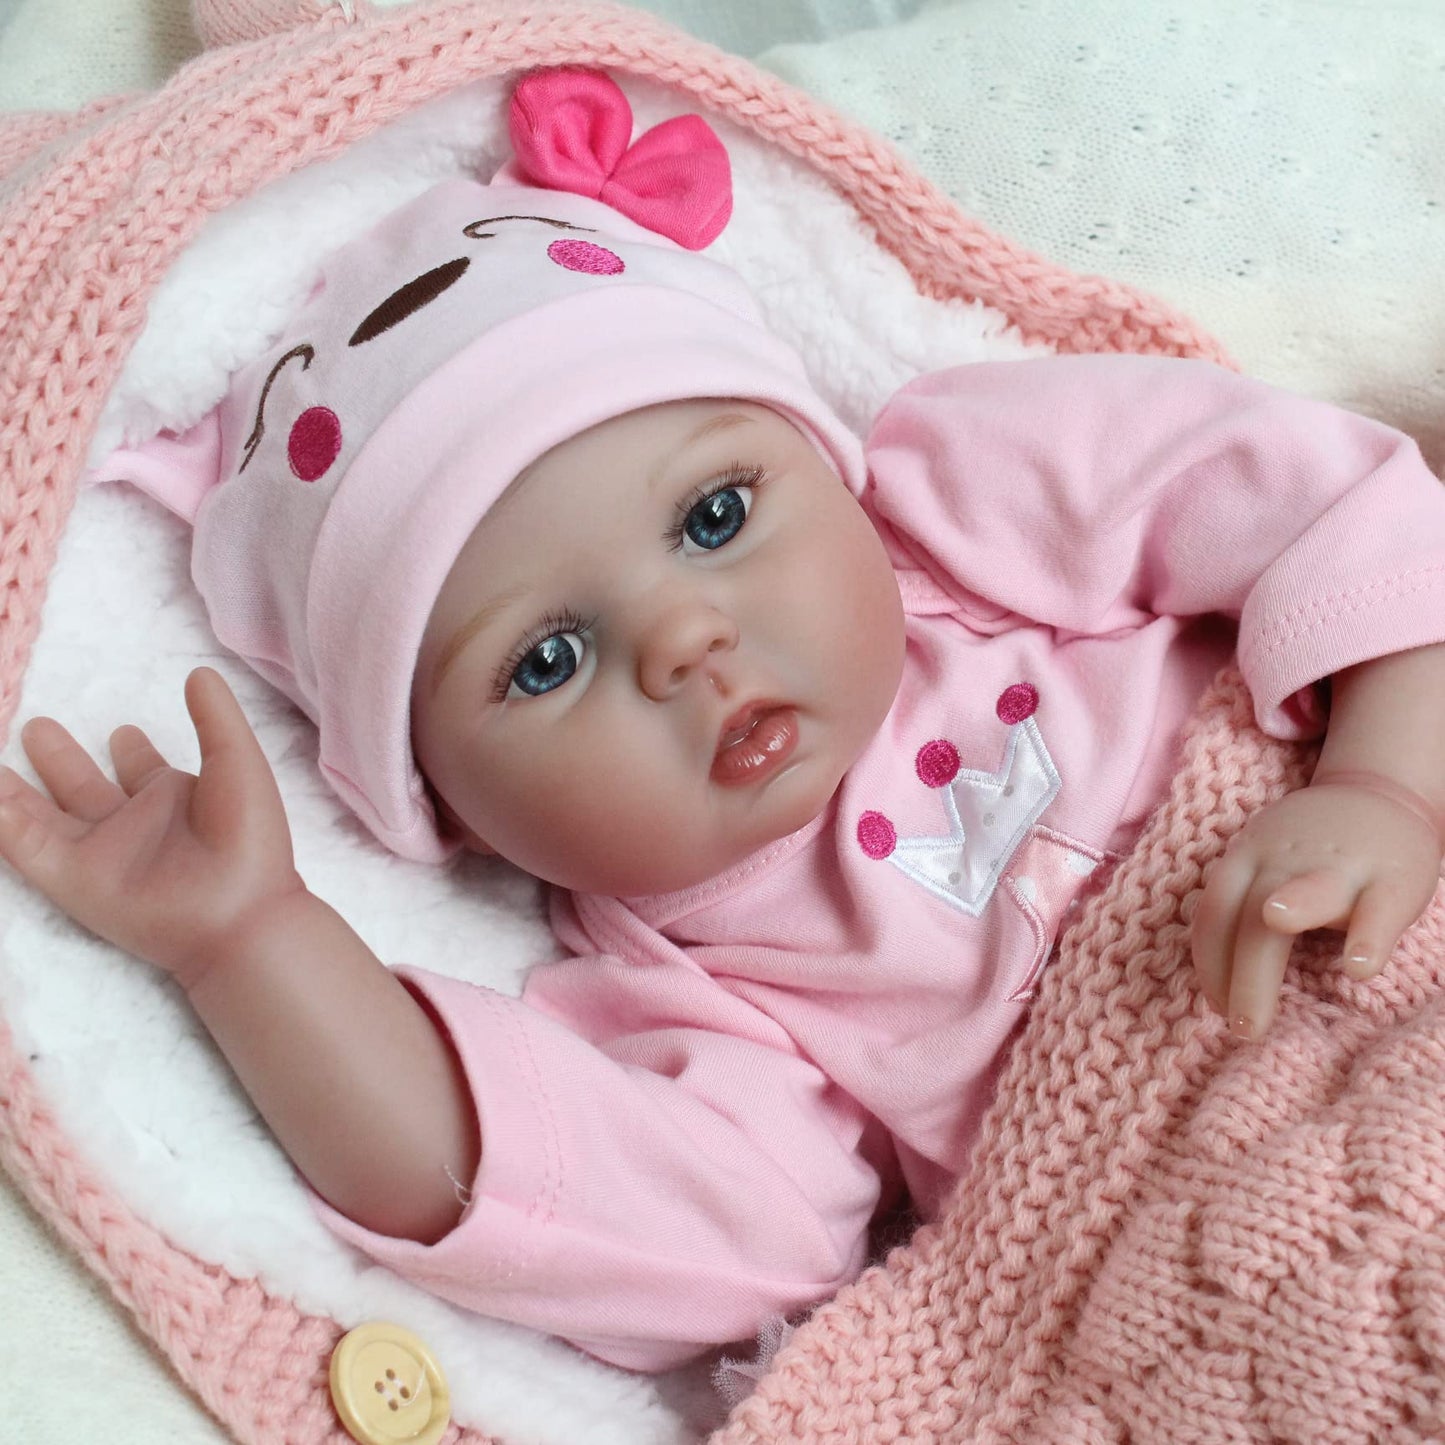 CHAREX Realistic Reborn Baby Dolls Real Looking Lifelike for Girls 22 Inch Handmade Weighted Newborn Silicone Doll with Giraffe Toy Gifts Kids Age 3+